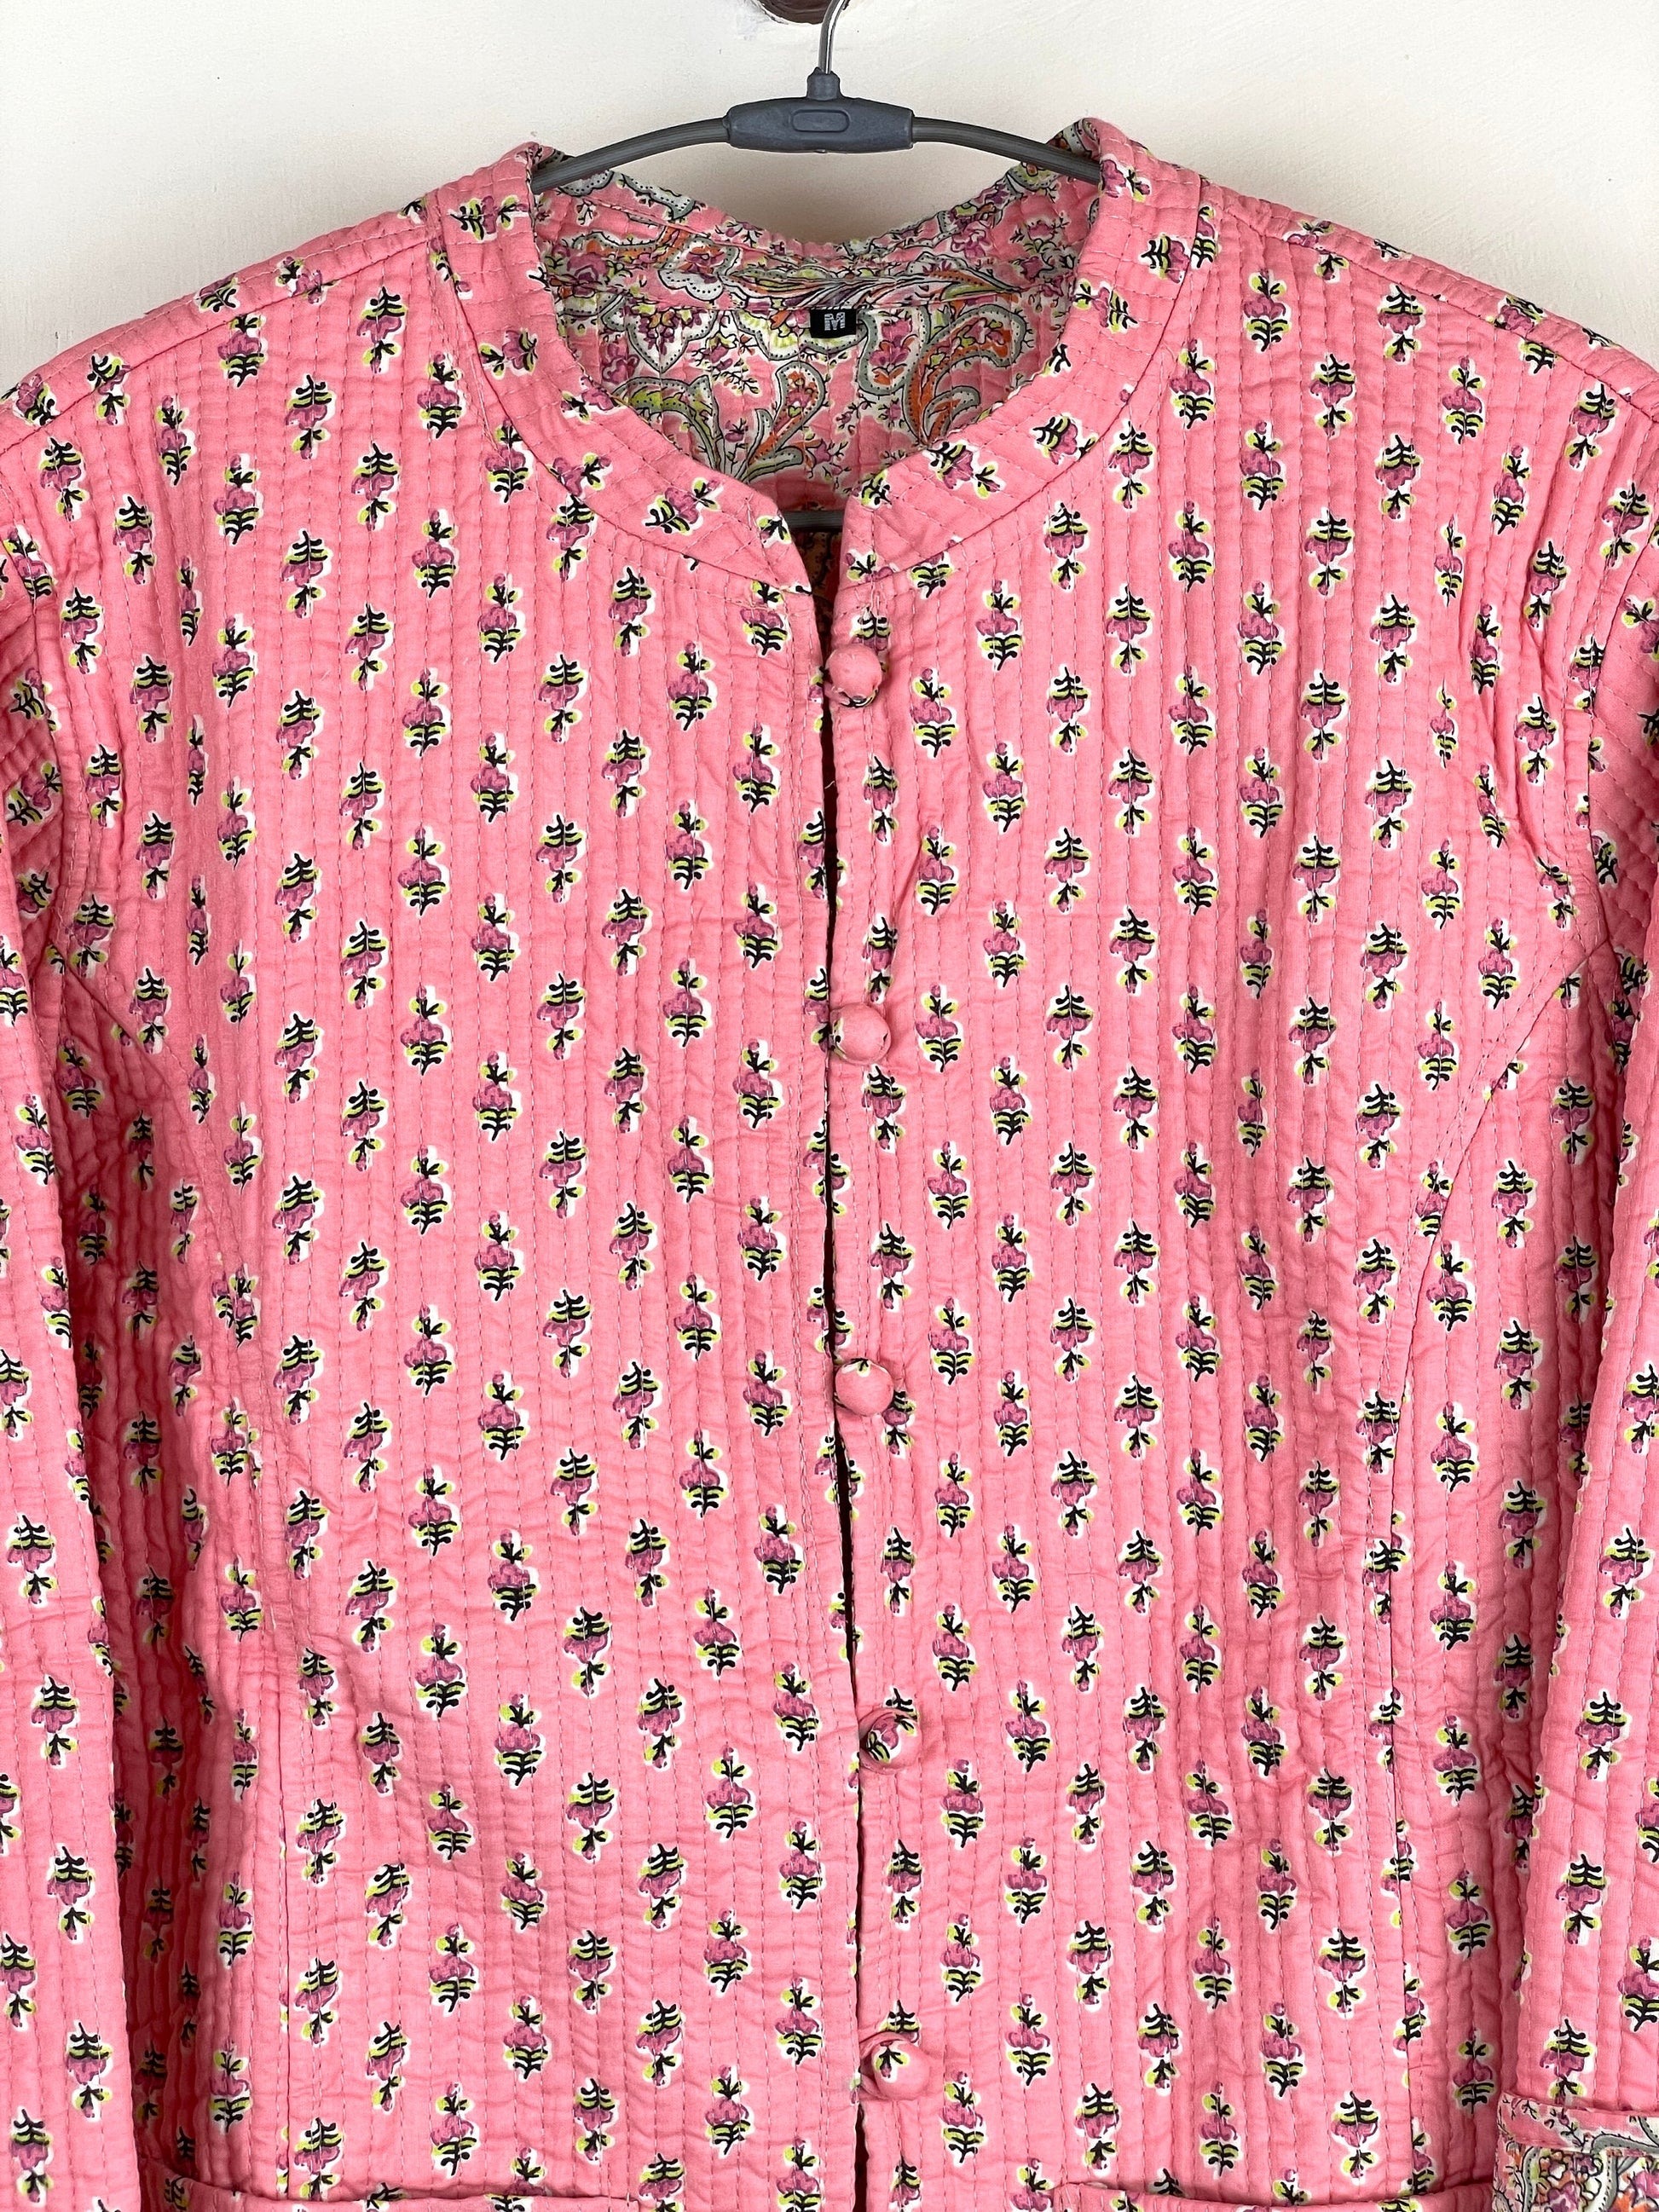 Indian Handmade Quilted Cotton Fabric Jacket Stylish Pink Floral Women's Coat, Reversible Waistcoat, Christmas Gift for Her